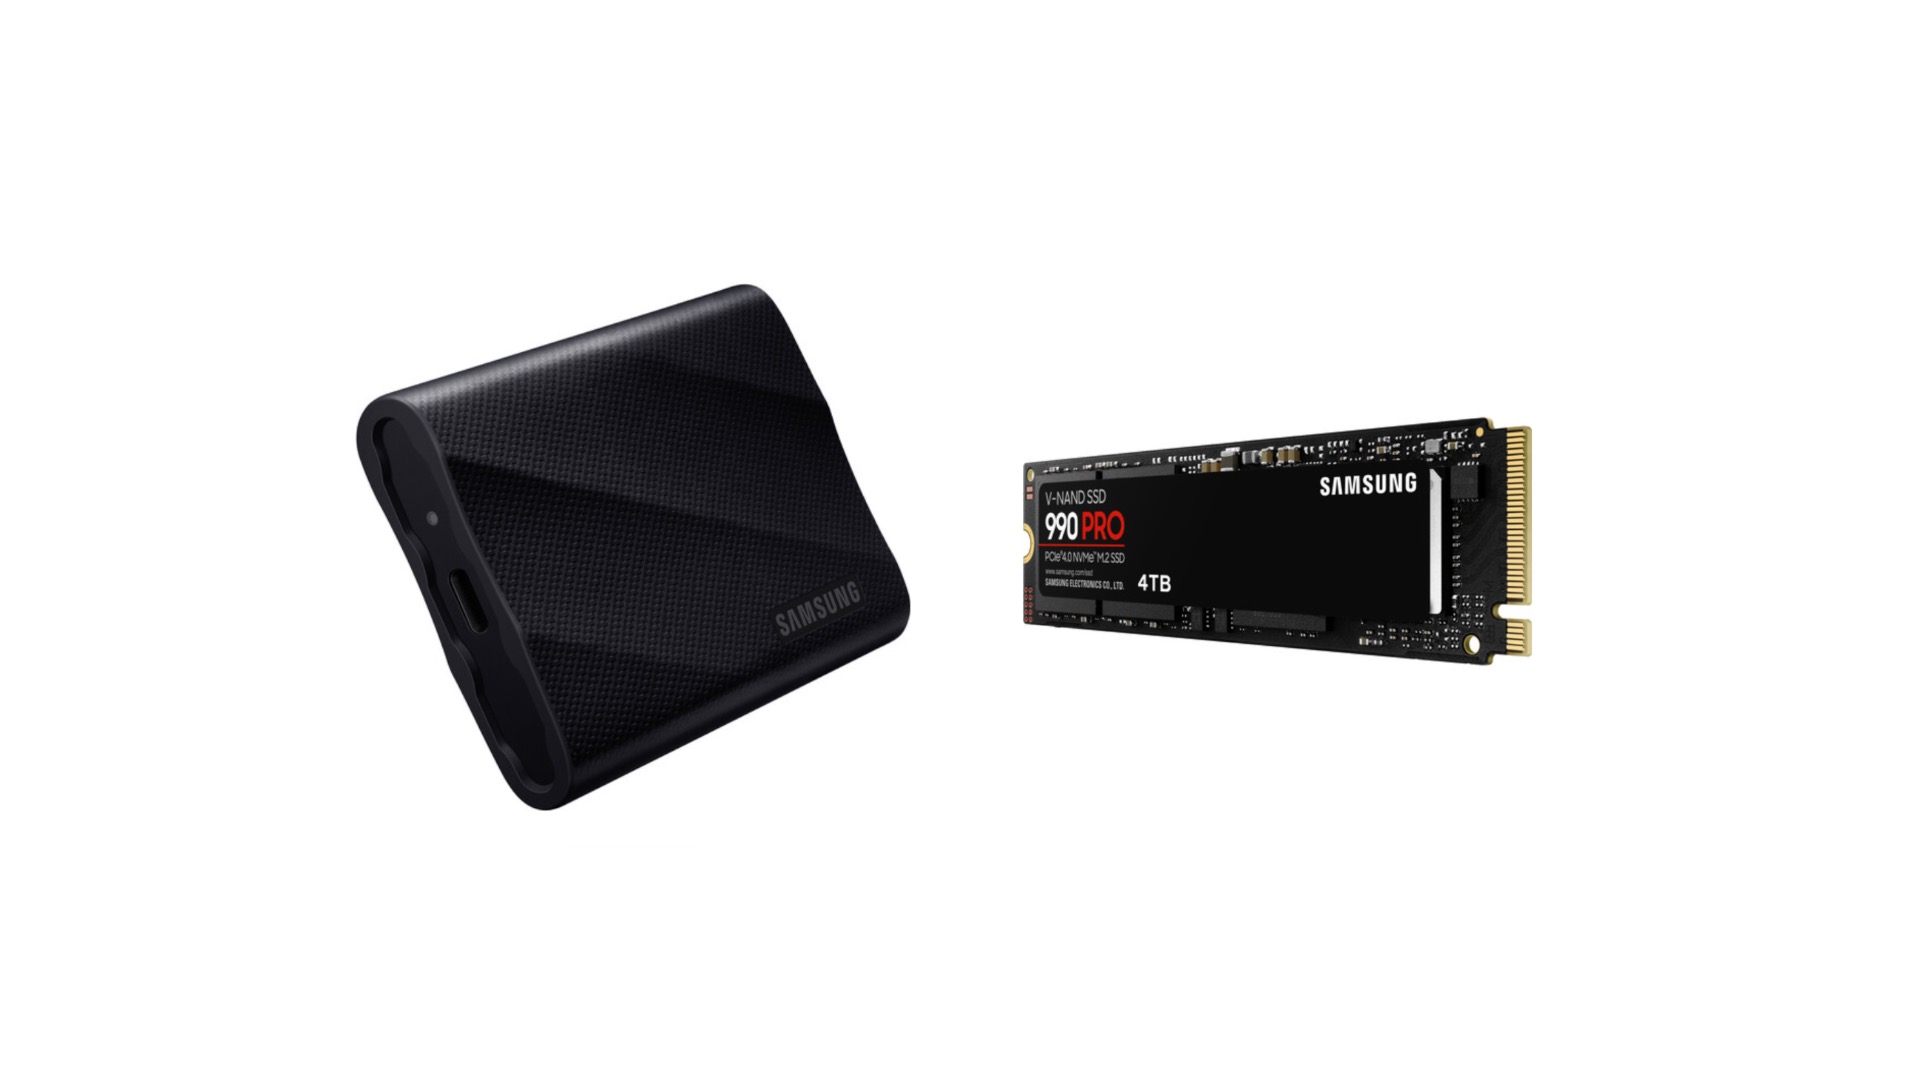 Samsung T9 Portable Portable SSDs & 4TB 990 PRO PCIe 4.0 M.2 SSD -  Newsshooter